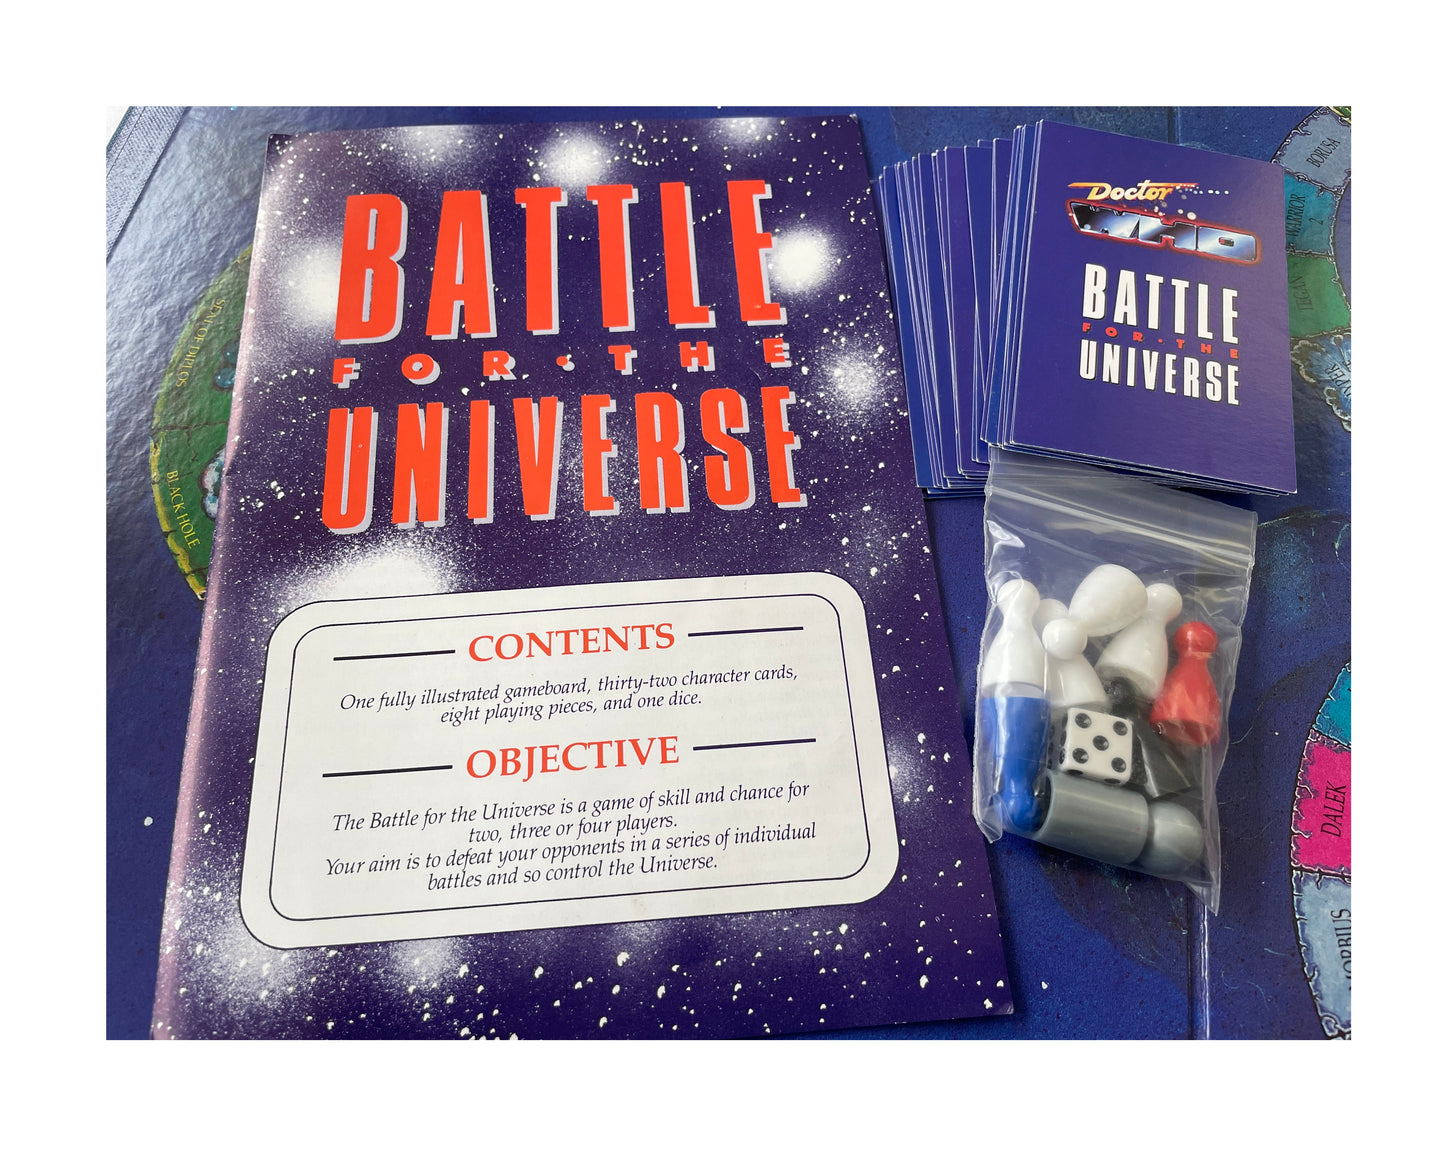 Vintage 1989 Doctor Dr Who The Battle For The Universe Board Game By The Games Team Ltd - Complete In The Original Box